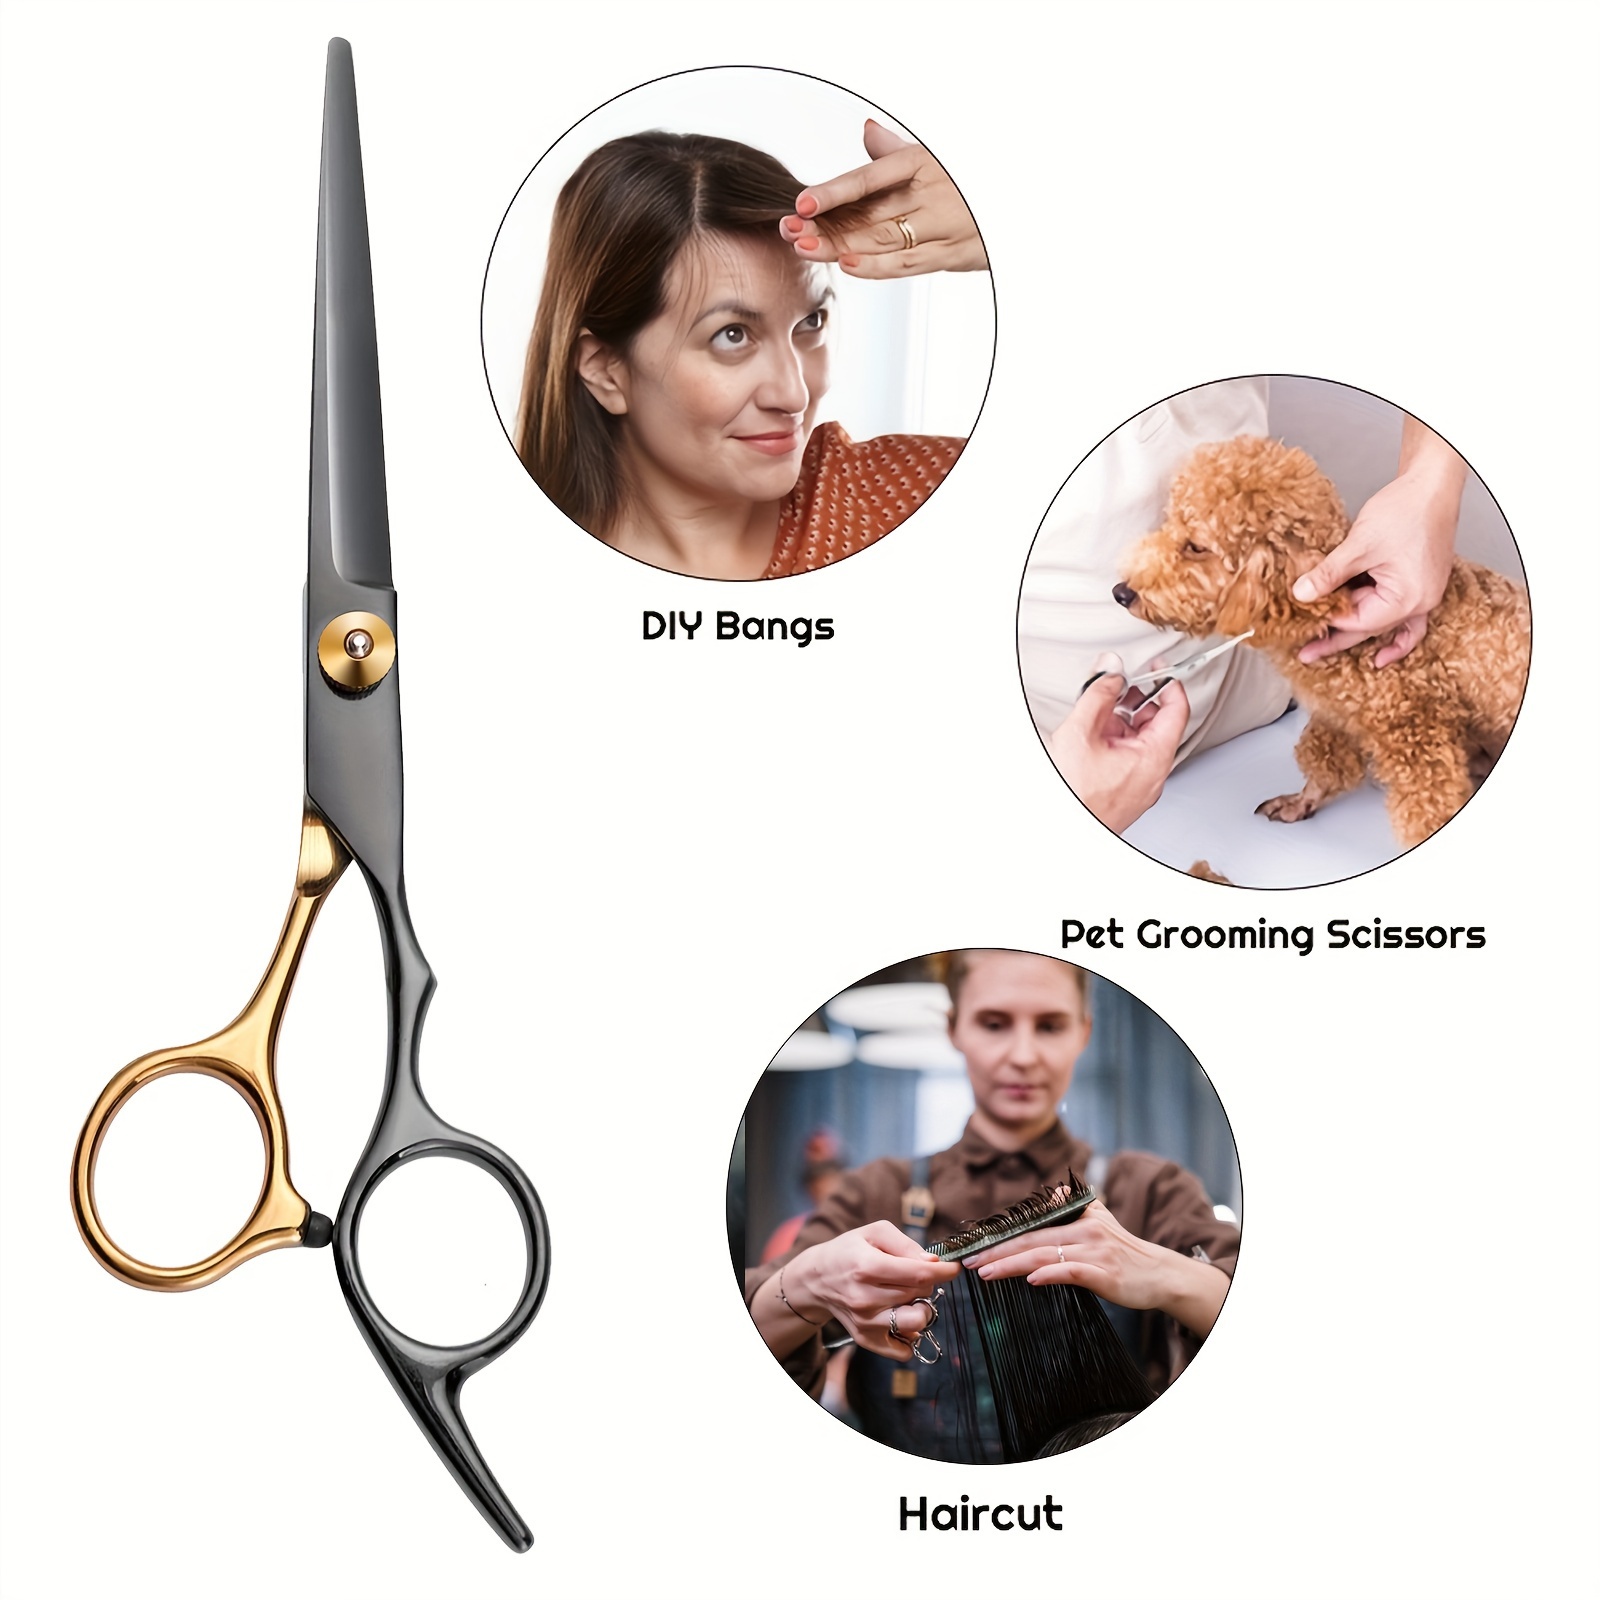 Dropship Professional Hair Cutting Scissors Set Hairdressing Salon Barber  Shears Scissors to Sell Online at a Lower Price